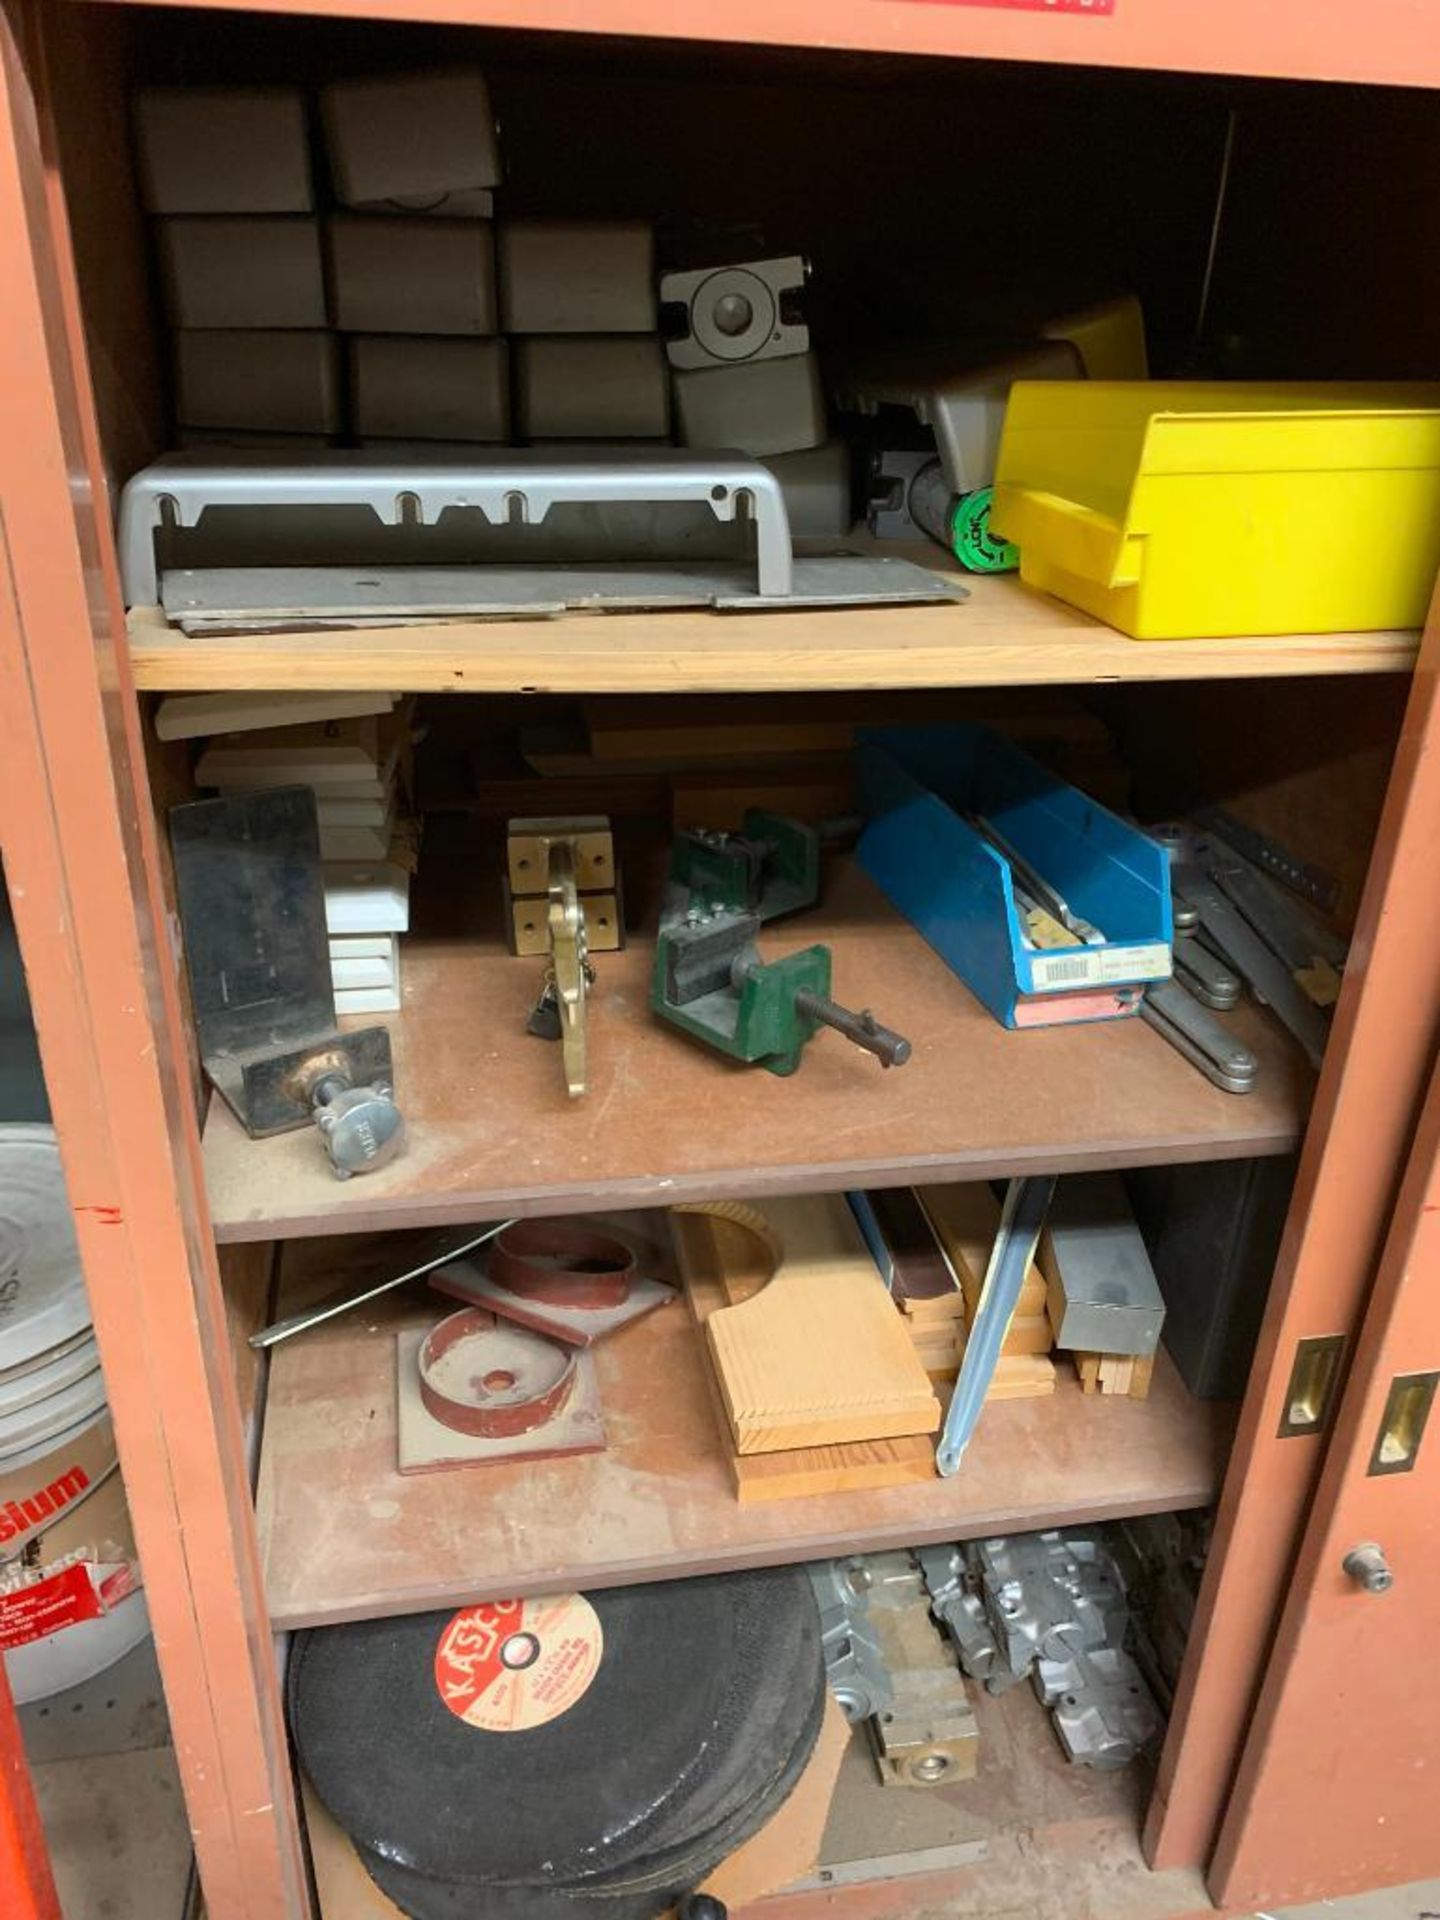 Remaining Contents of Wood Shop; Shelves, Wood Cabinets & Lockers w/ Hardware, Hand Tools, Brackets, - Image 17 of 34